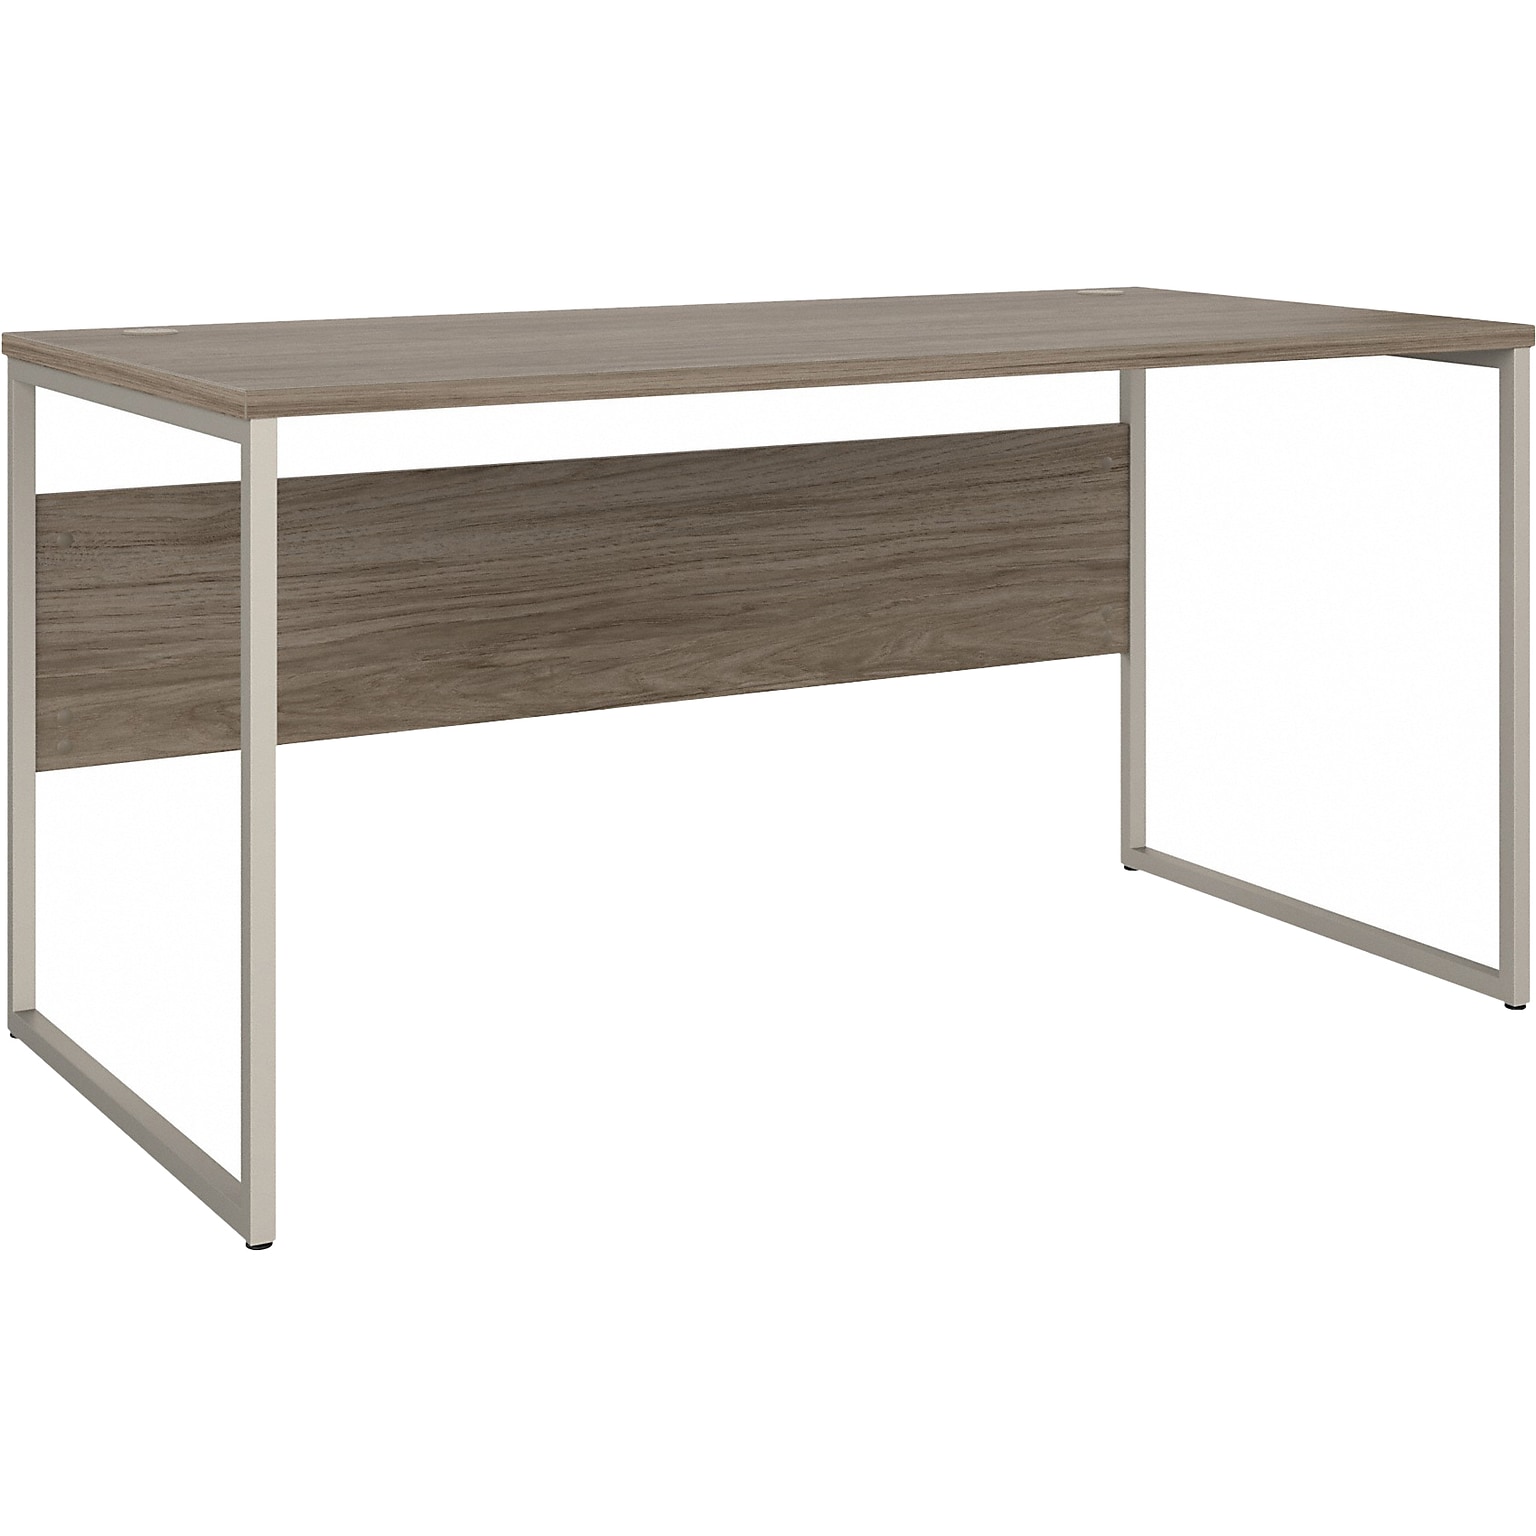 Bush Business Furniture Hybrid 60W Computer Table Desk with Metal Legs, Modern Hickory (HYD360MH)